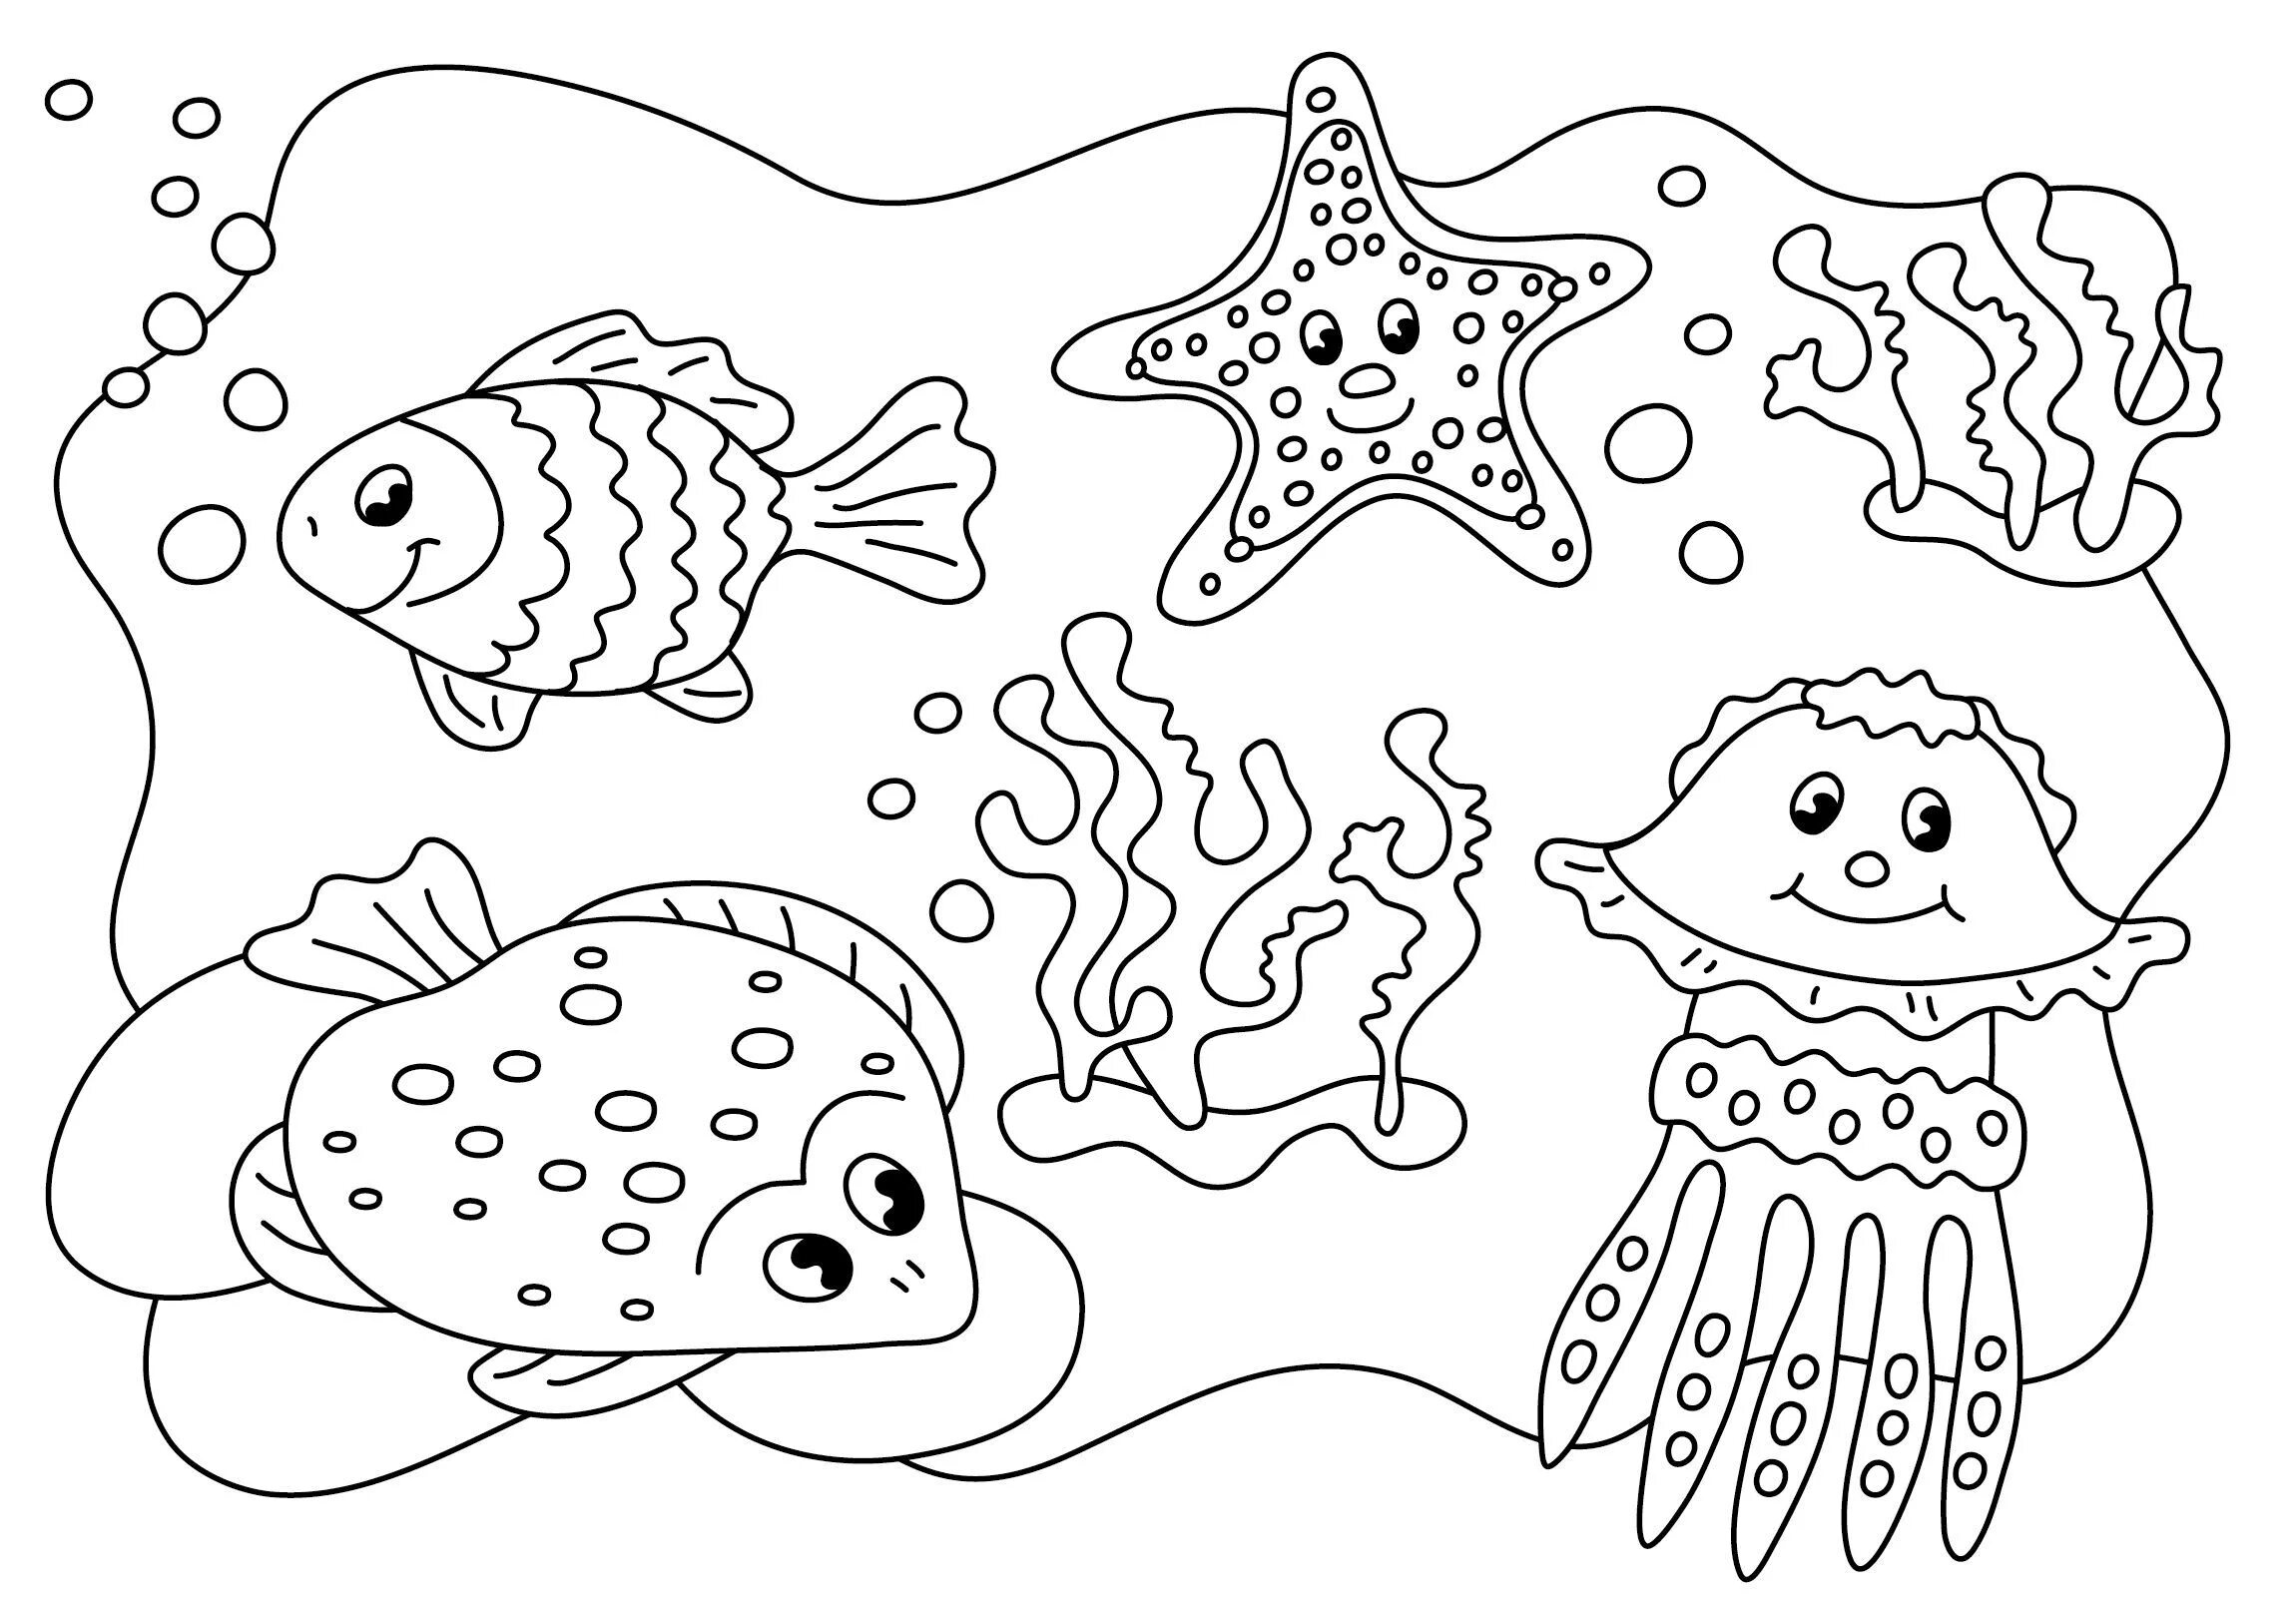 Seabed for kids #5